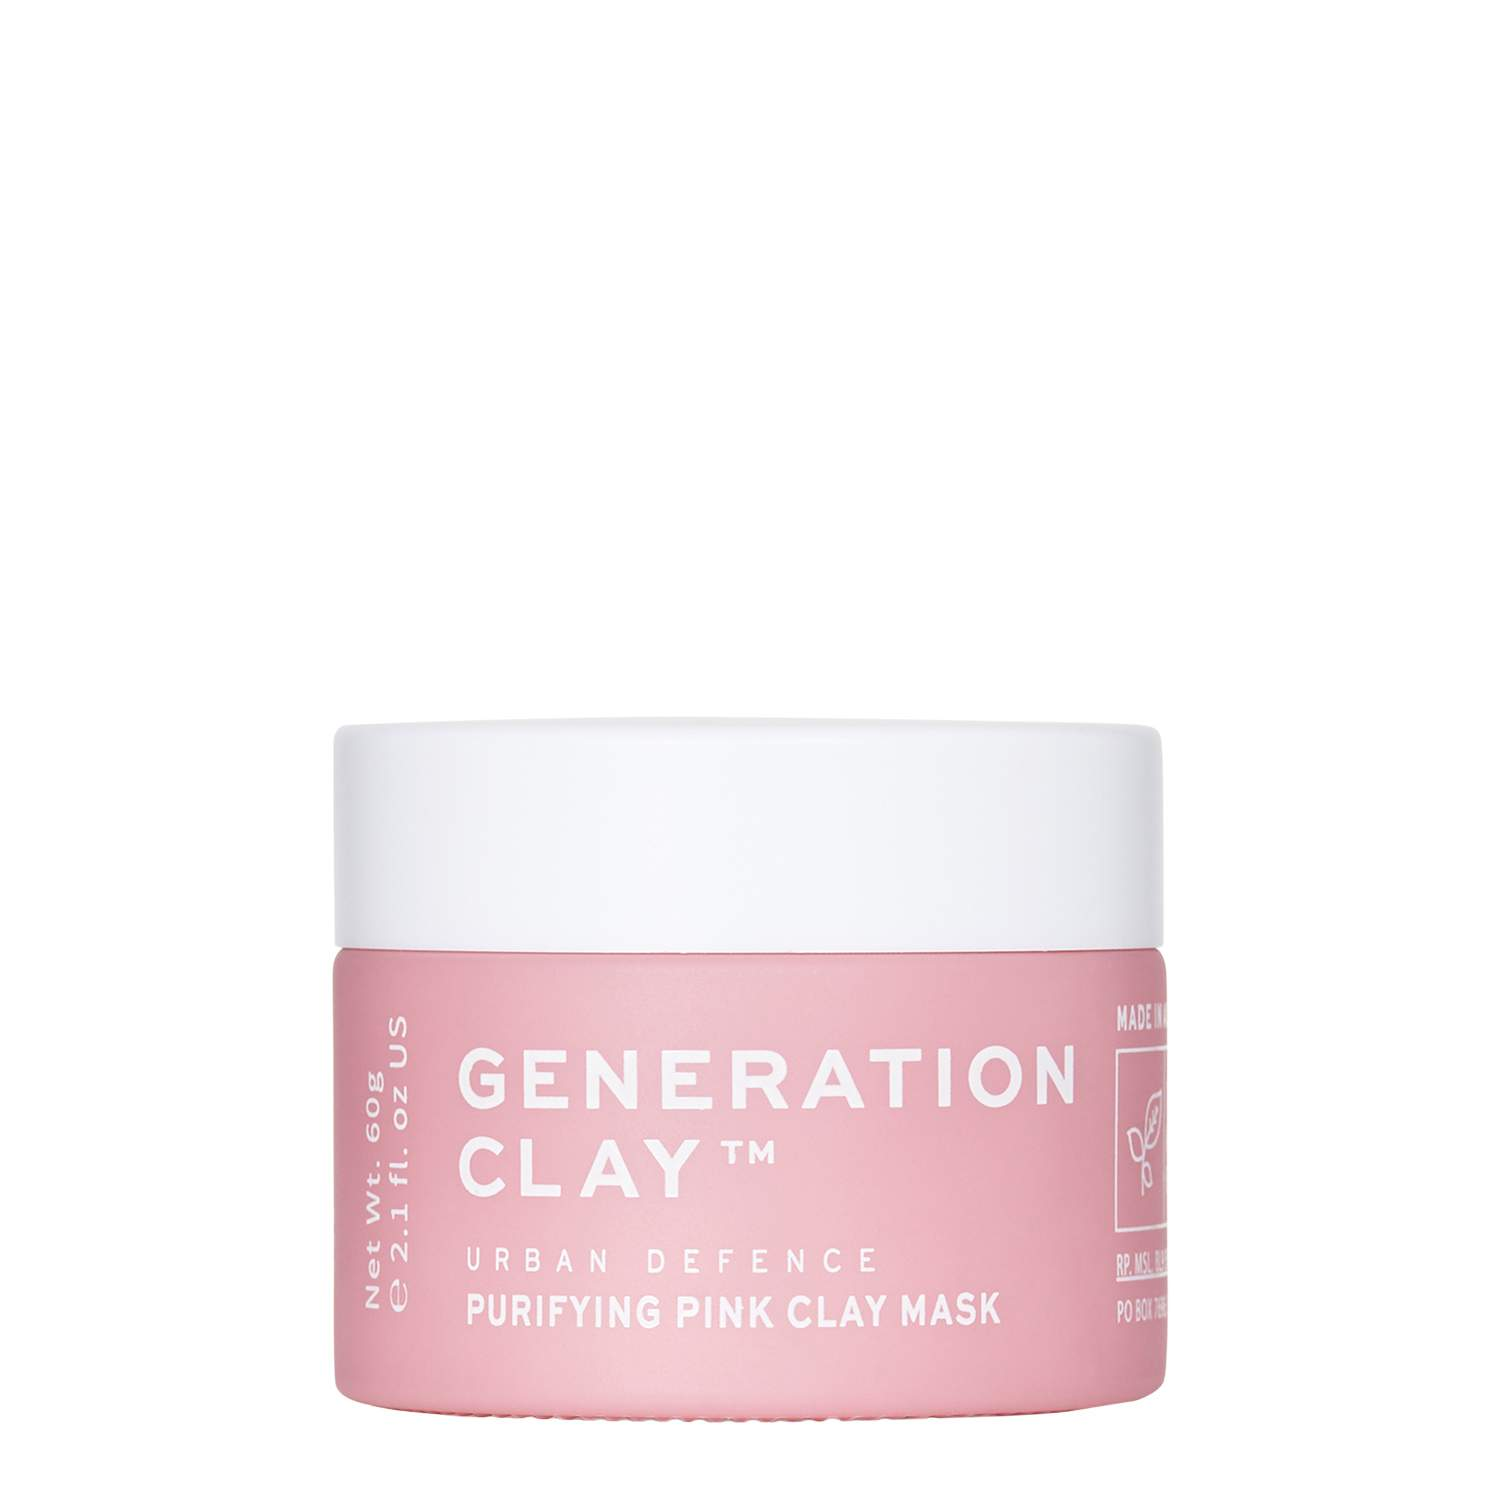 Generation Clay Urban Defence Pink Purifying Clay Mask